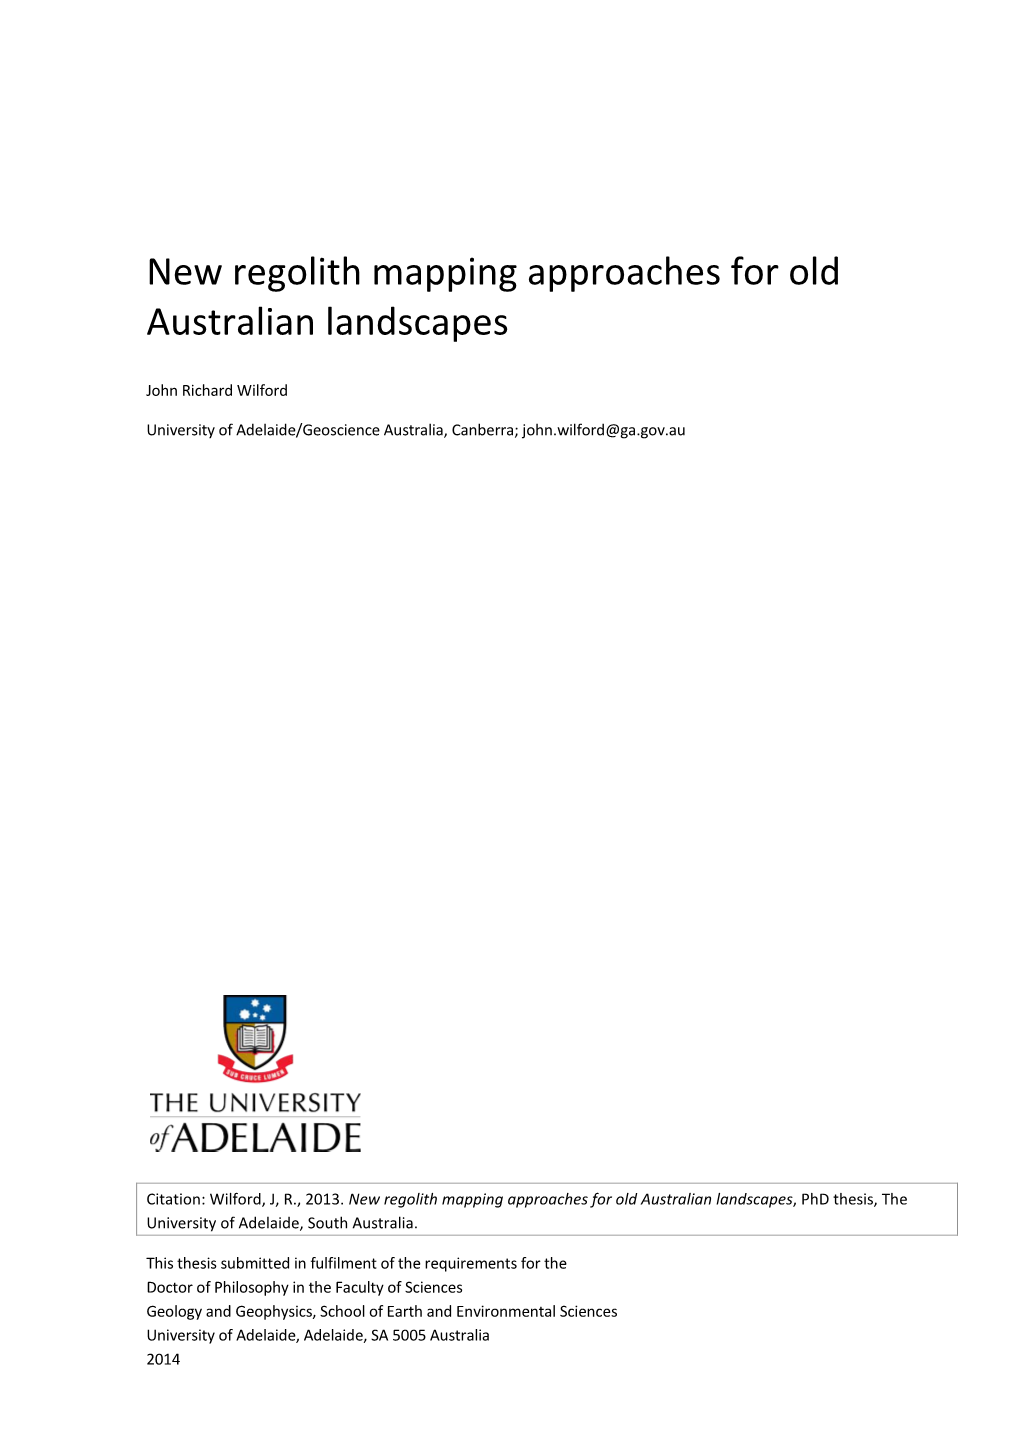 New Regolith Mapping Approaches for Old Australian Landscapes